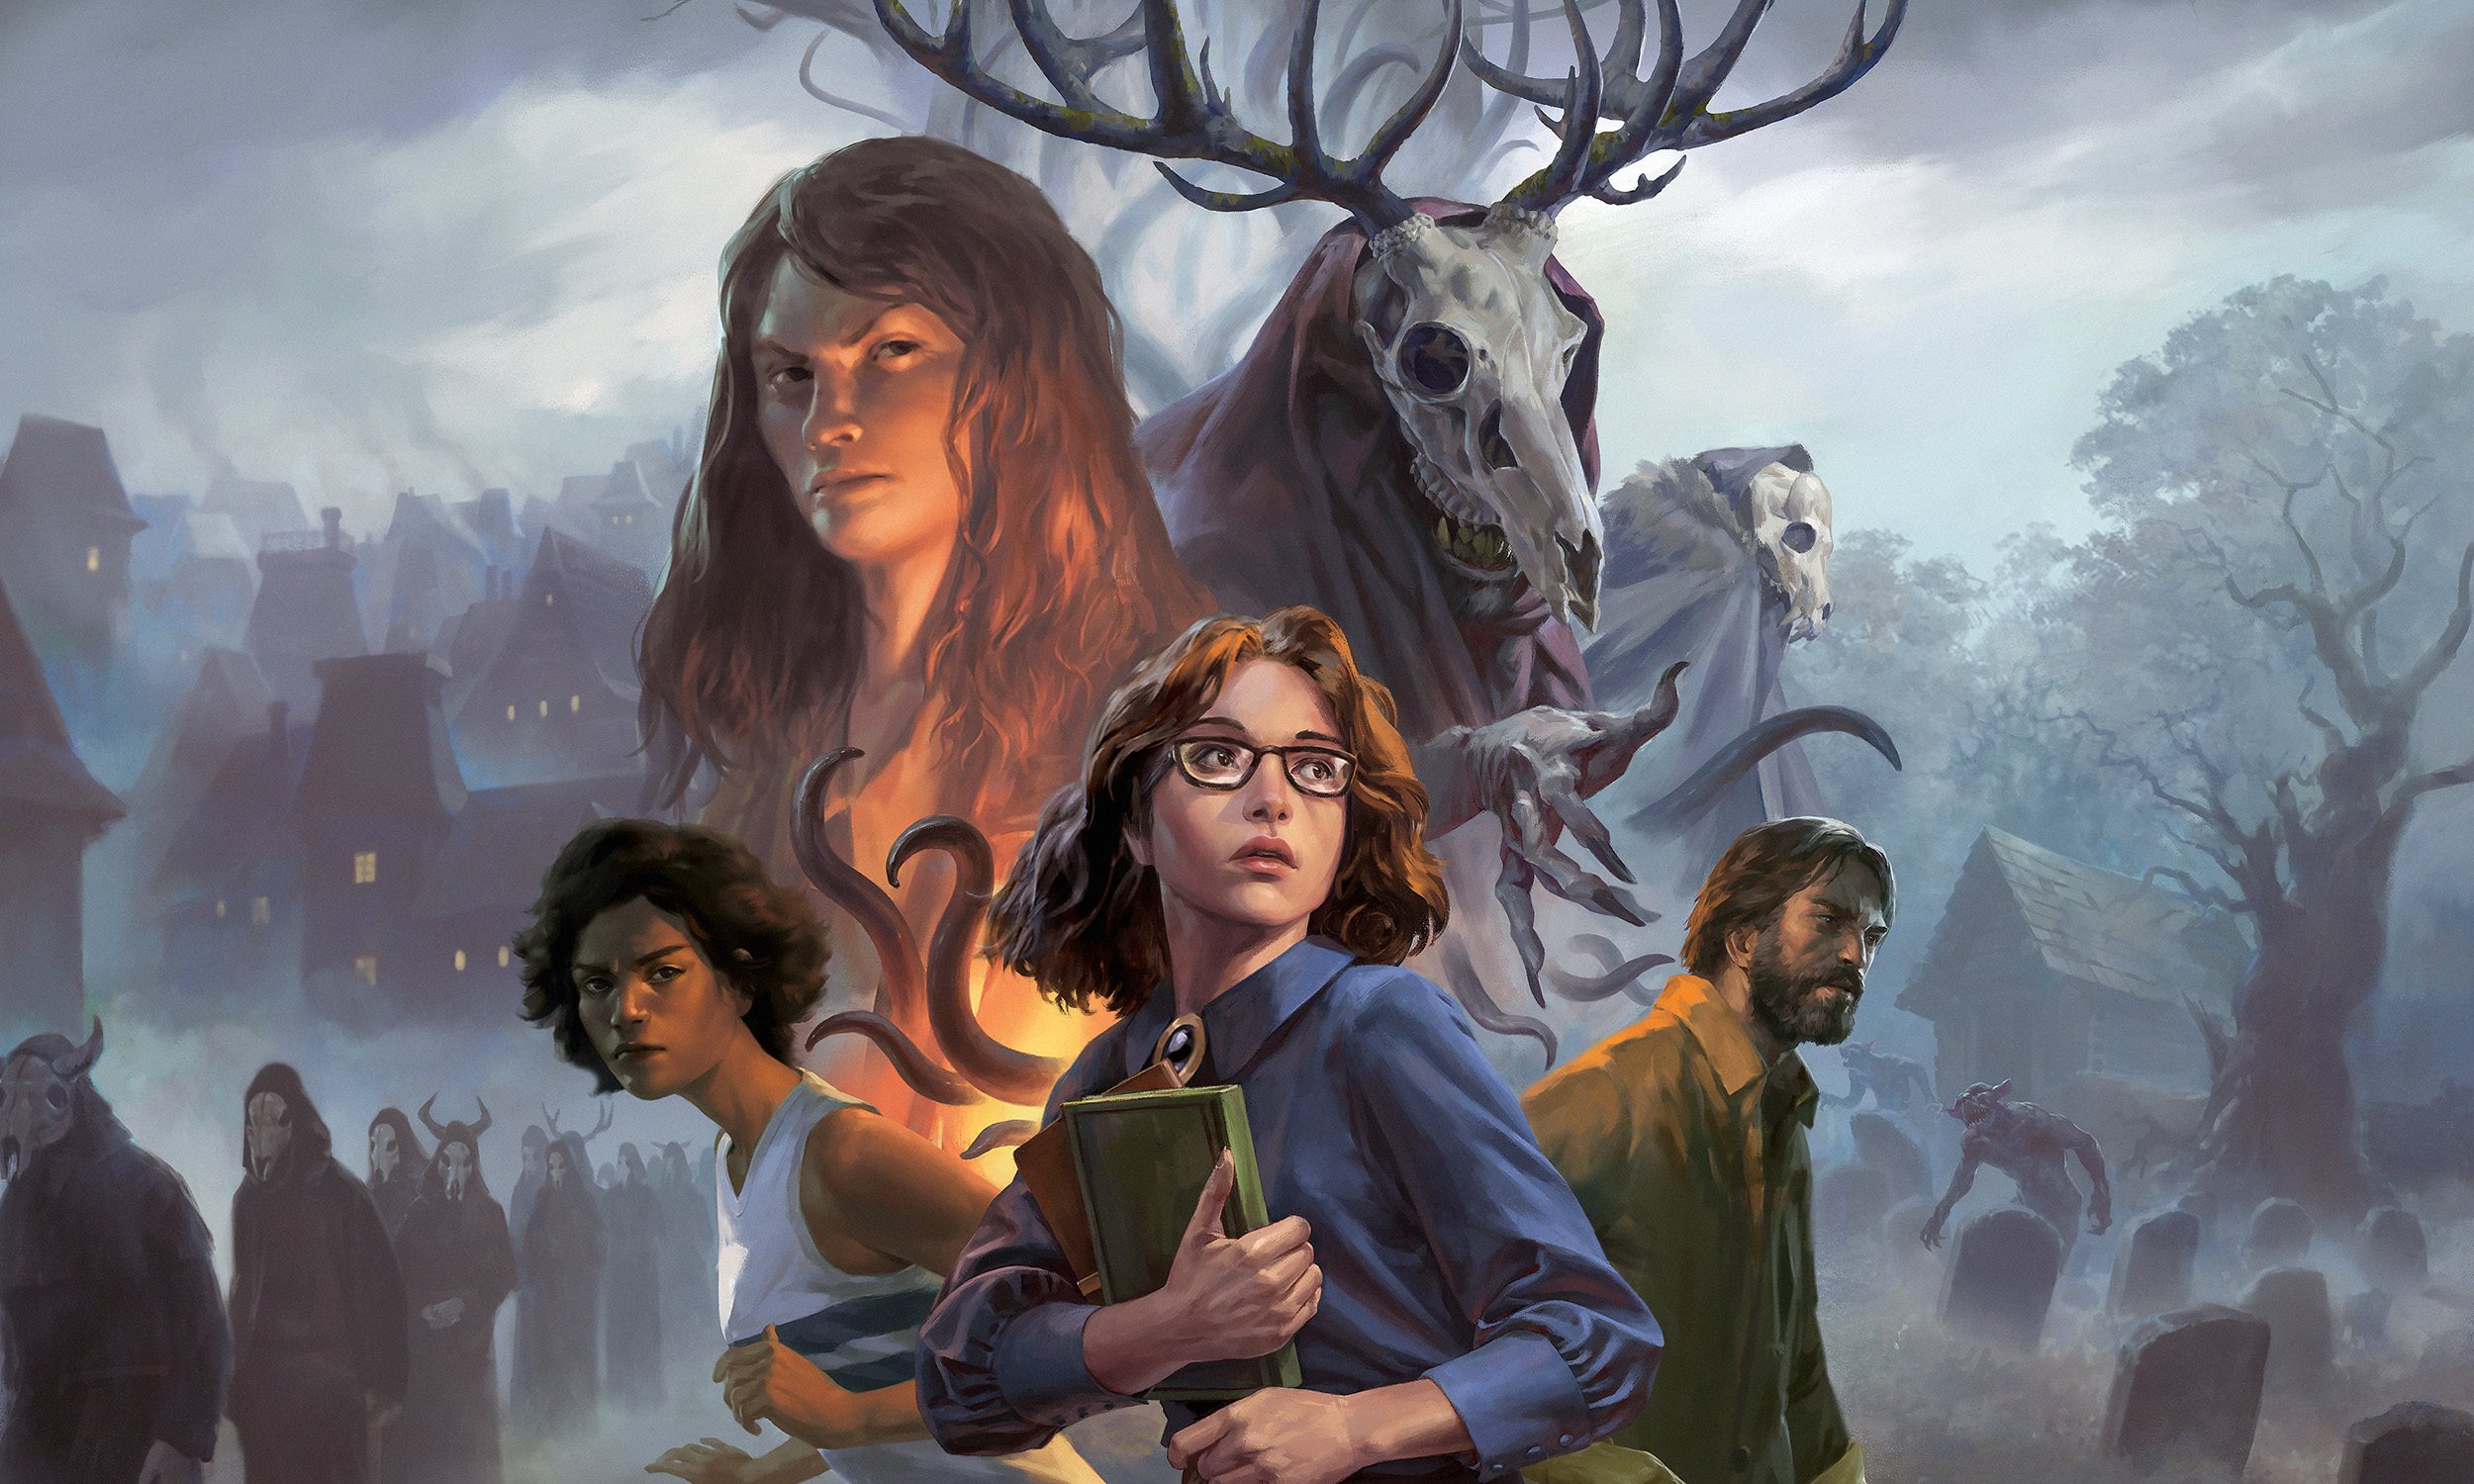 The new engine behind the forthcoming Arkham Horror Roleplaying Game